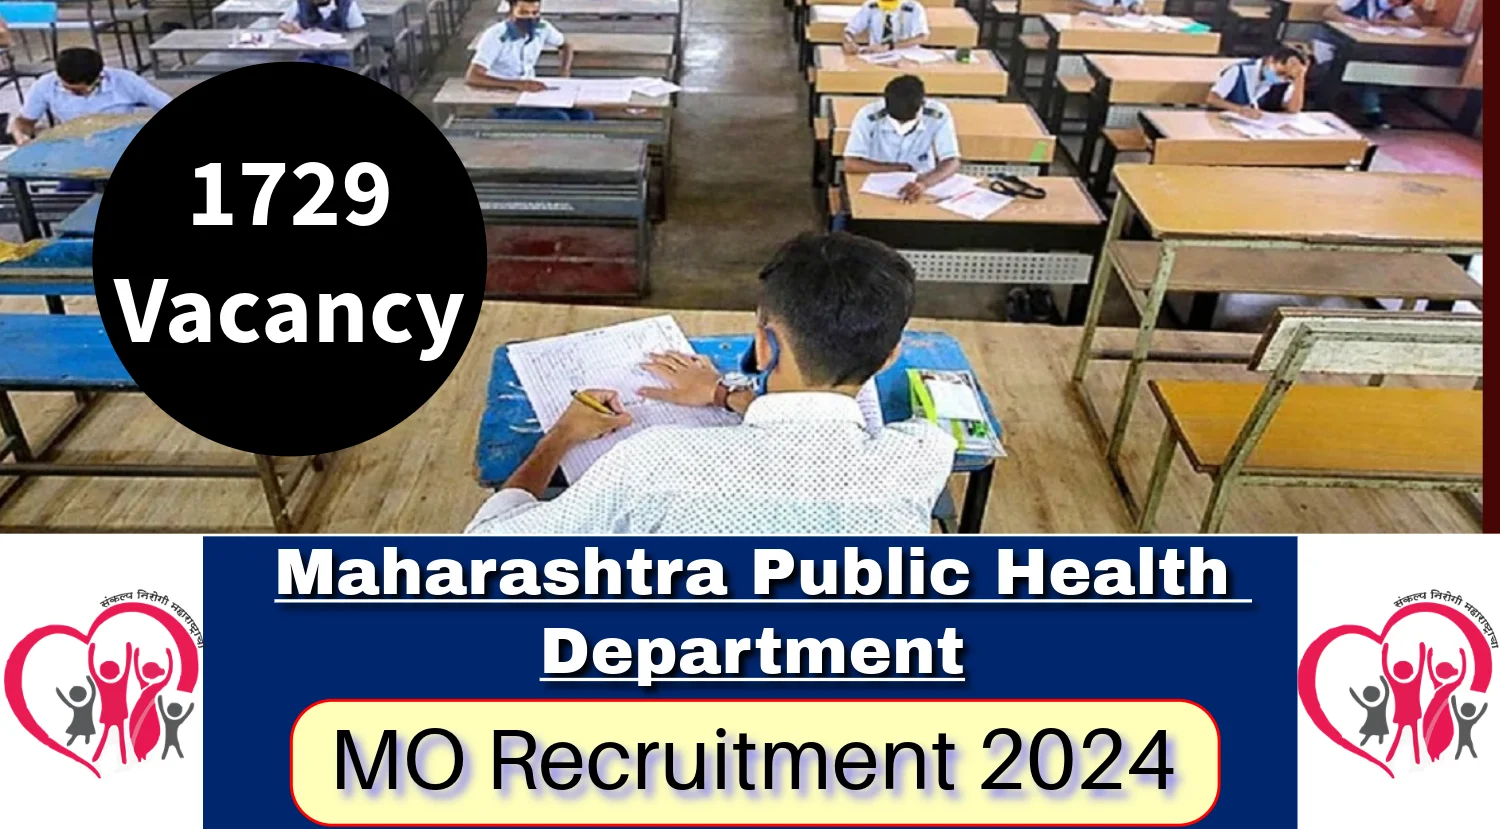 MAHA MO Recruitment 2024 Notification Out for 1729 Posts, Check Eligibility and Apply Now under  Maharashtra Public Health Department 